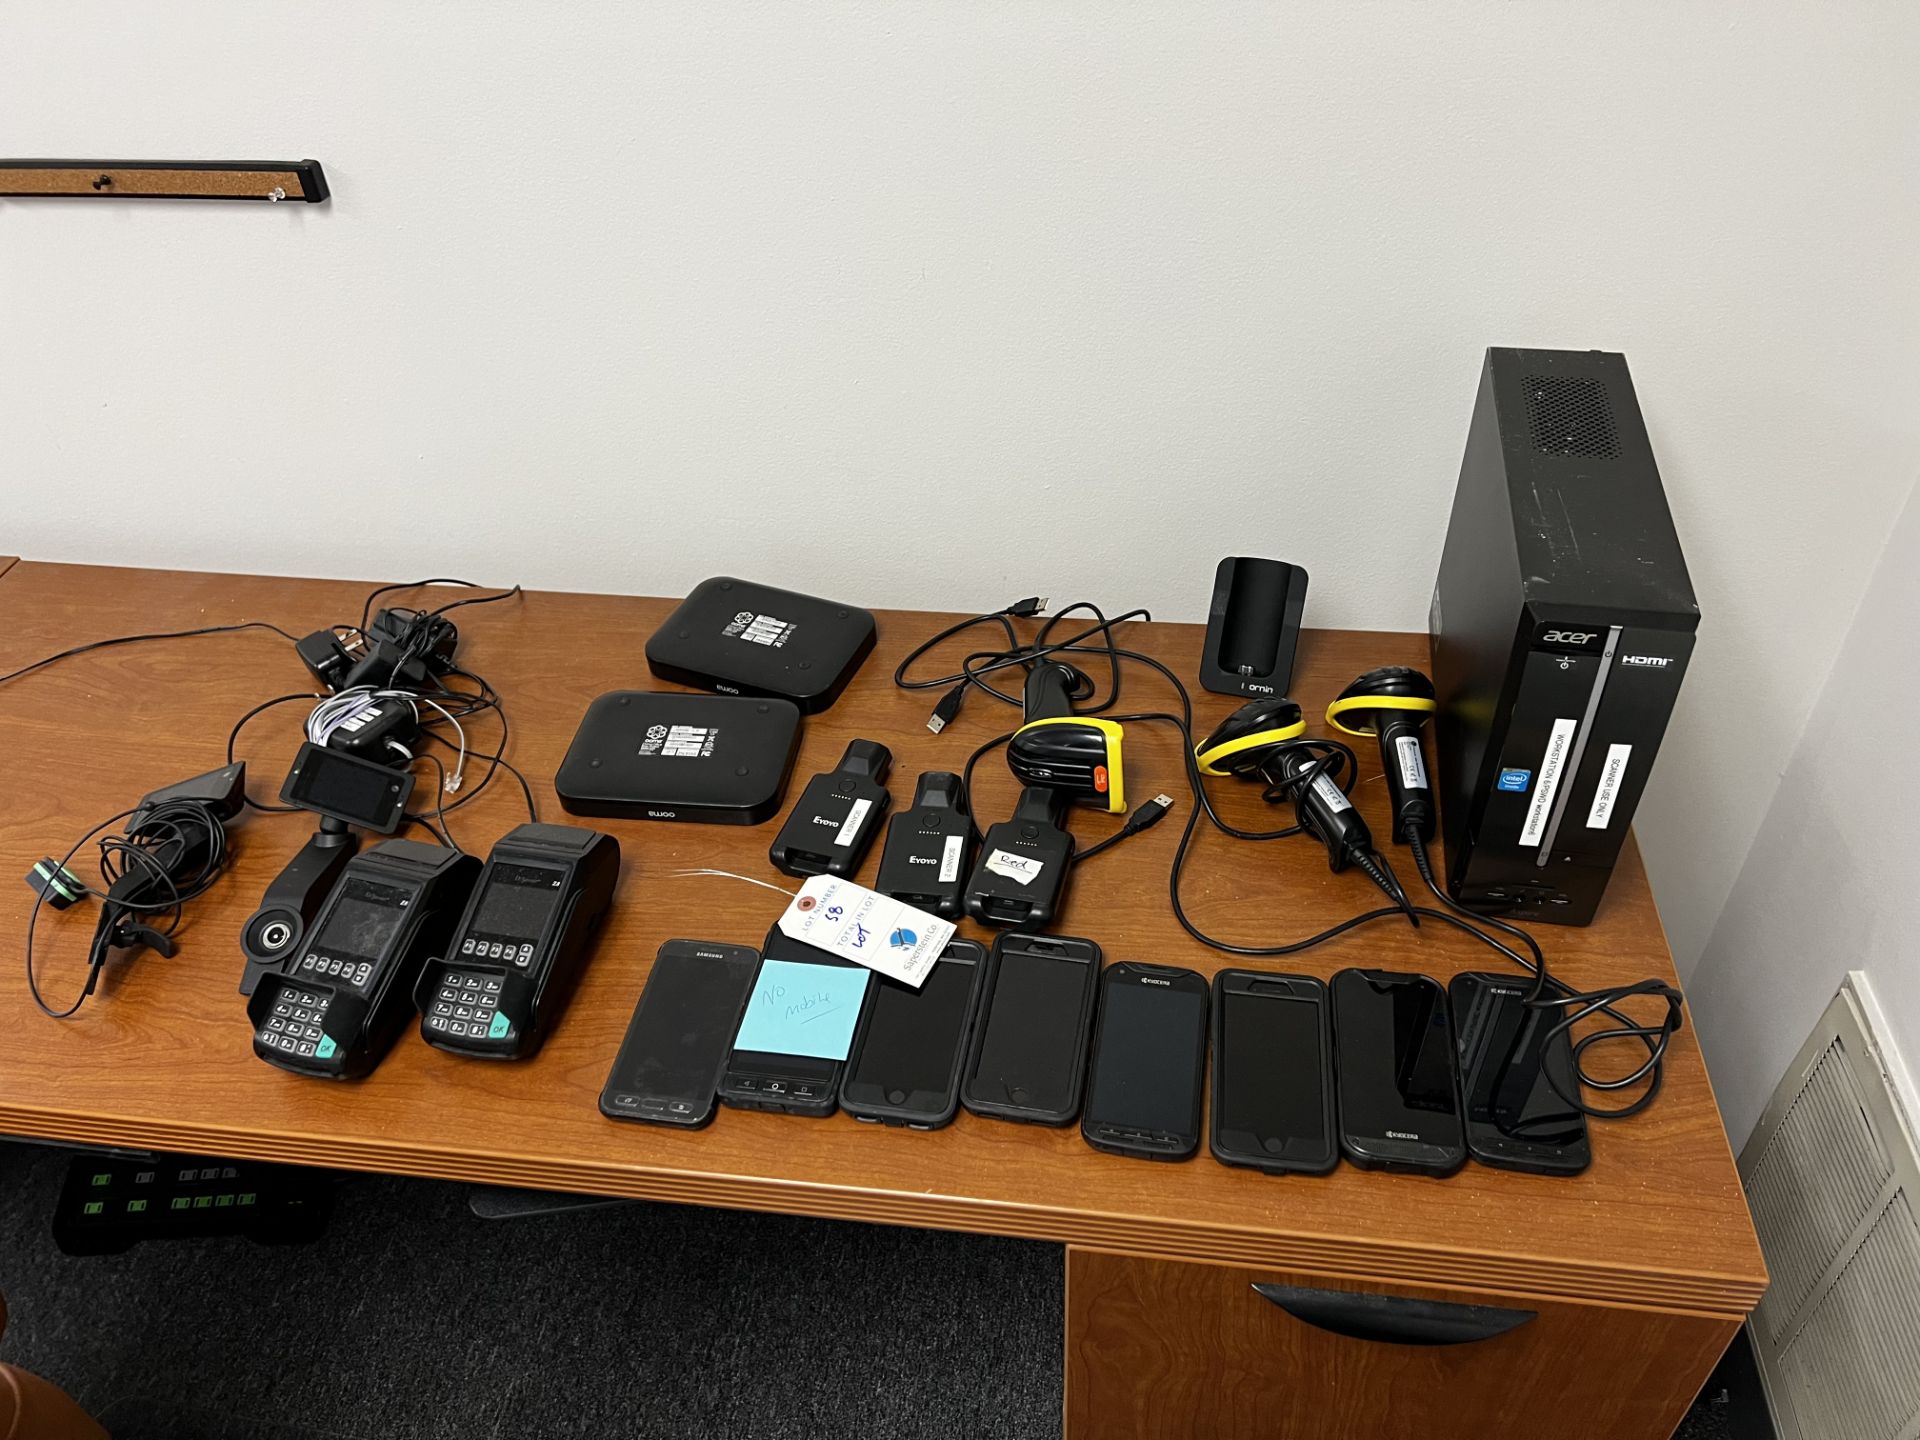 [LOT] Scanners, Printers, Receivers